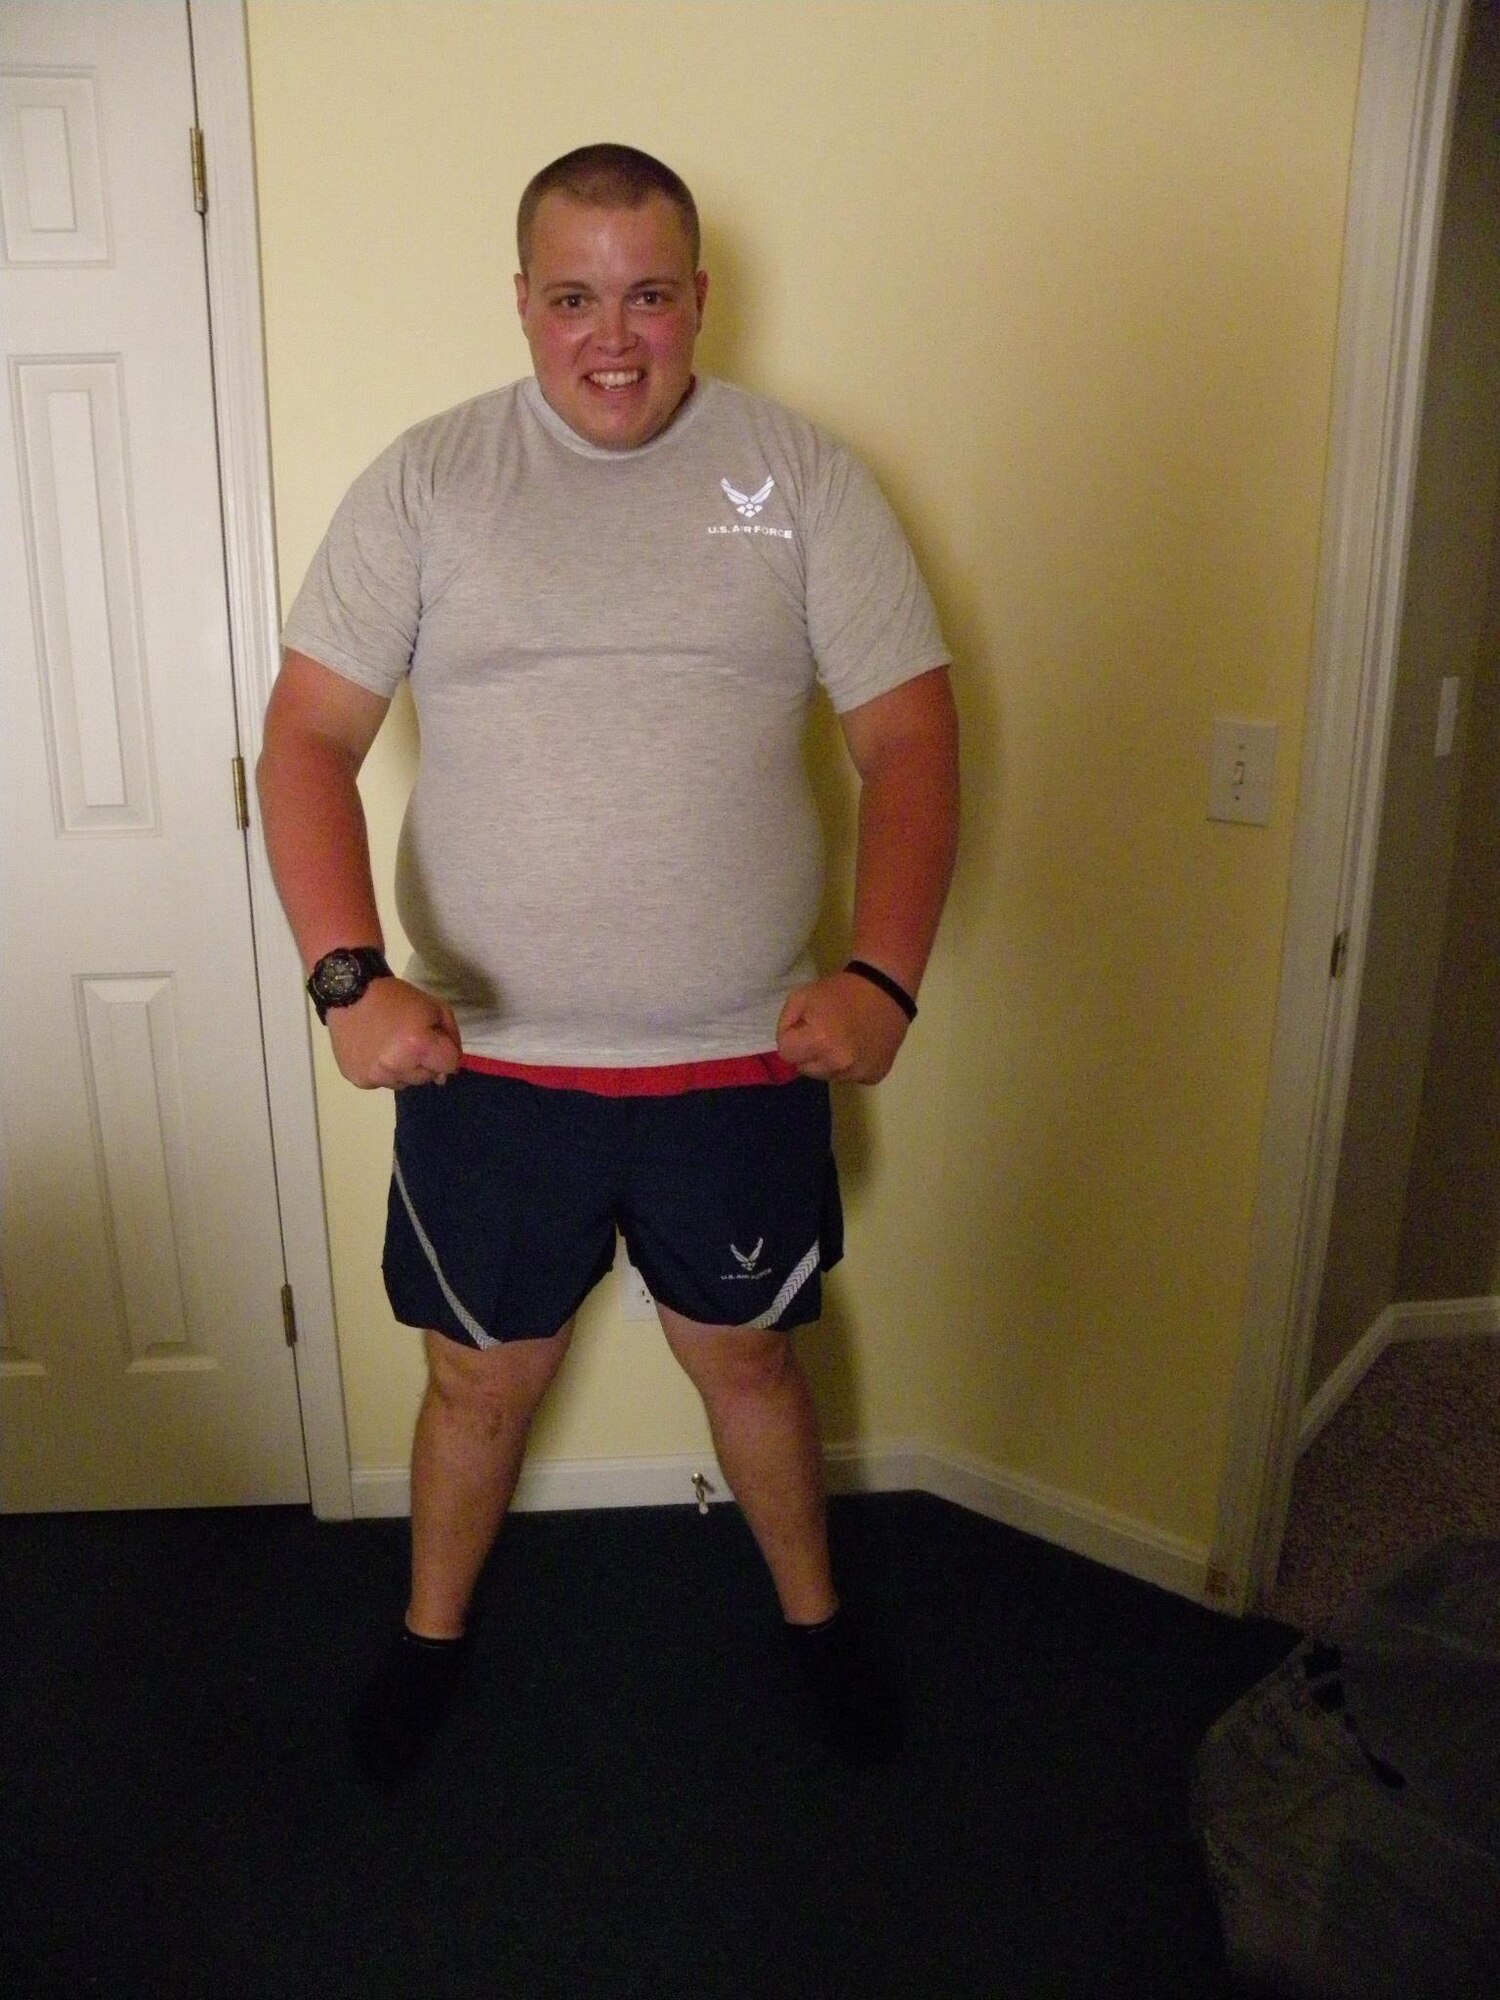 AFROTC Cadet Jesse Tewksbury at the beginning of his weight loss to get in shape and stay in AFROTC.